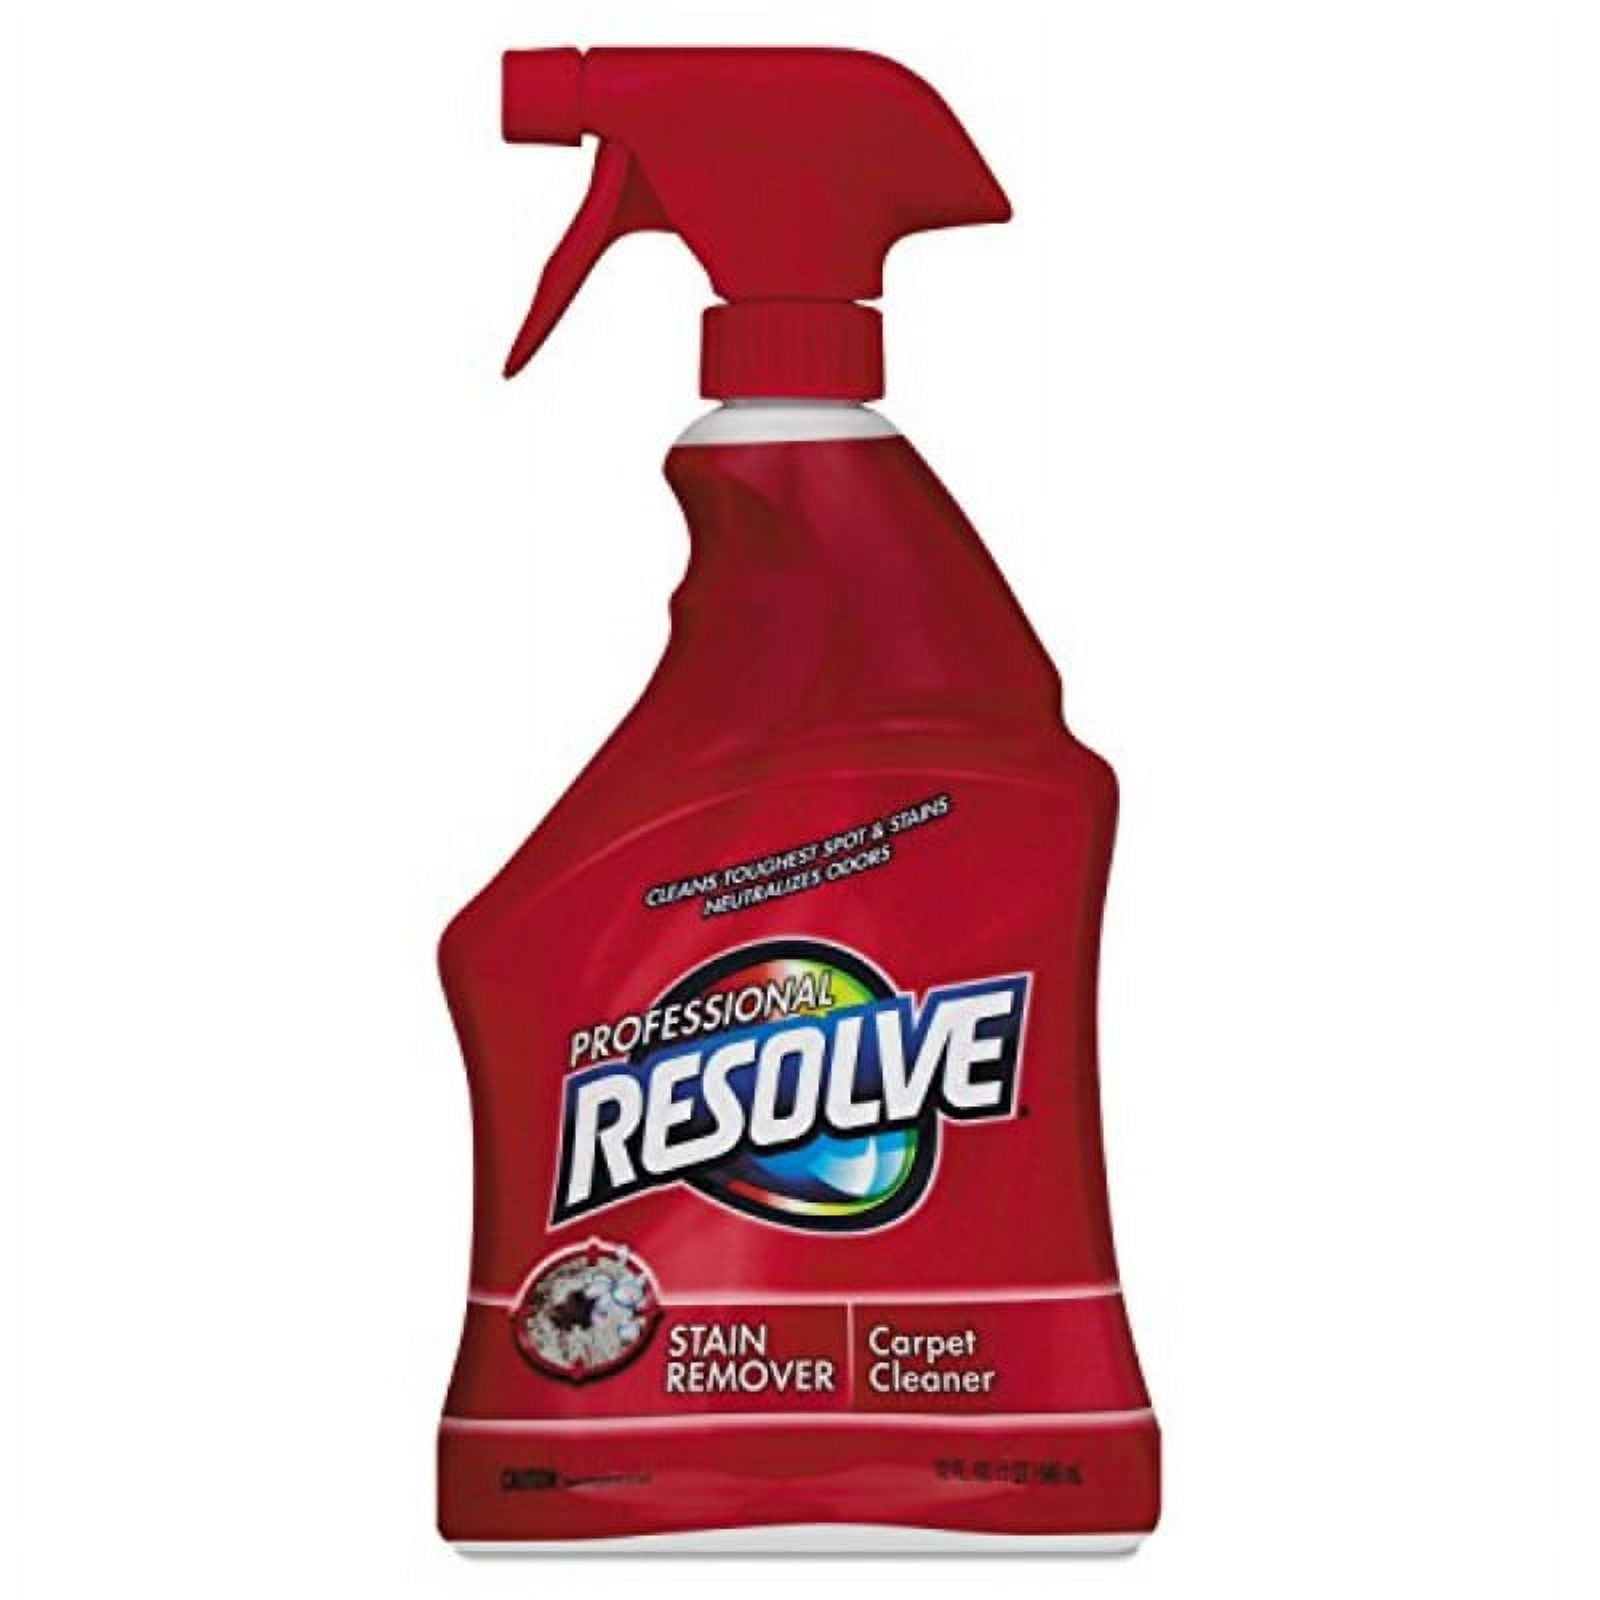  Resolve Carpet Spot and Stain Scrubber, Removes the Toughest  Set-In Stains, Scrubber Top, No Brush Required, 6.7 Fl Oz​ (Pack of 3) :  Health & Household